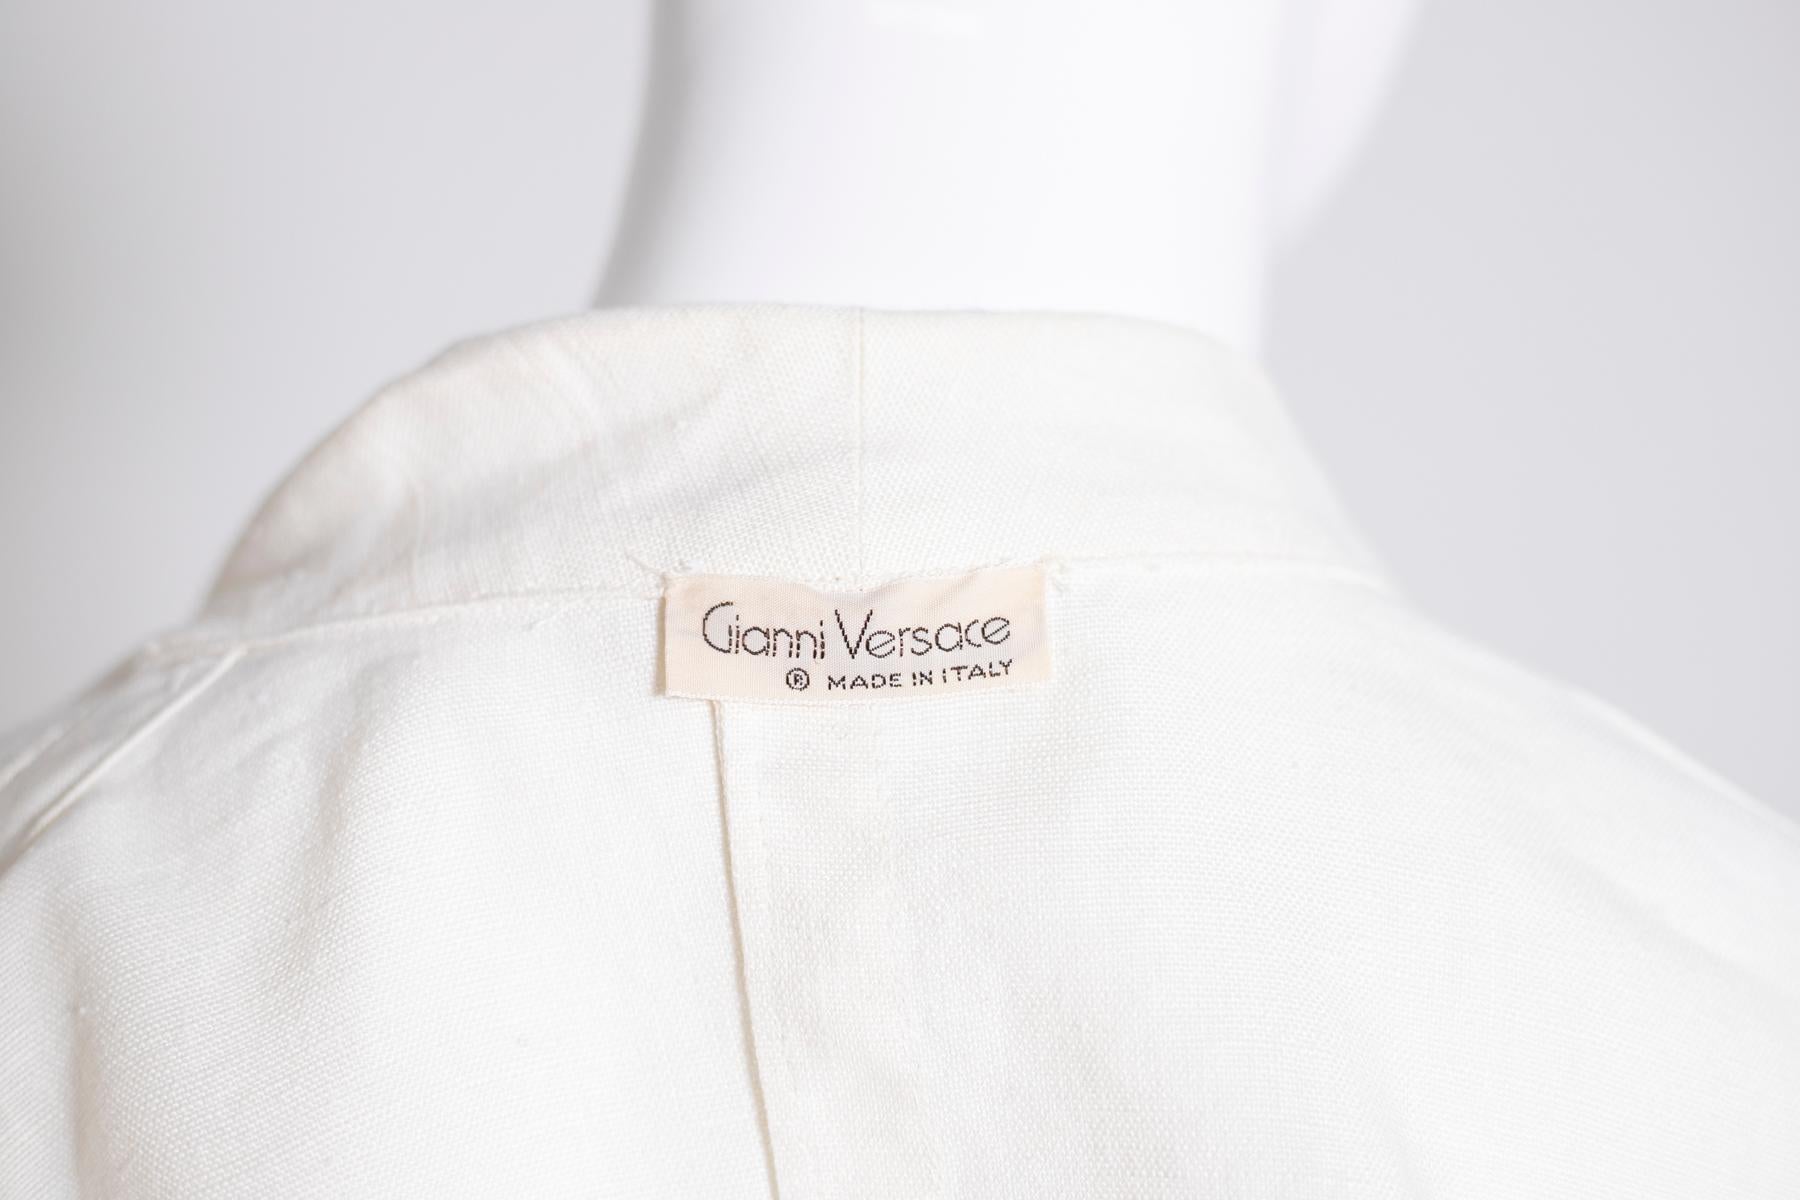 Sopraffine linen blazer designed by the great and unique Gianni Versace, made in Italy in the 1990s.
Original inside label.
The blazer is totally made of a white linen fabric, very elegant and chic.
The blazer has a shawl cut, in fact the collar is